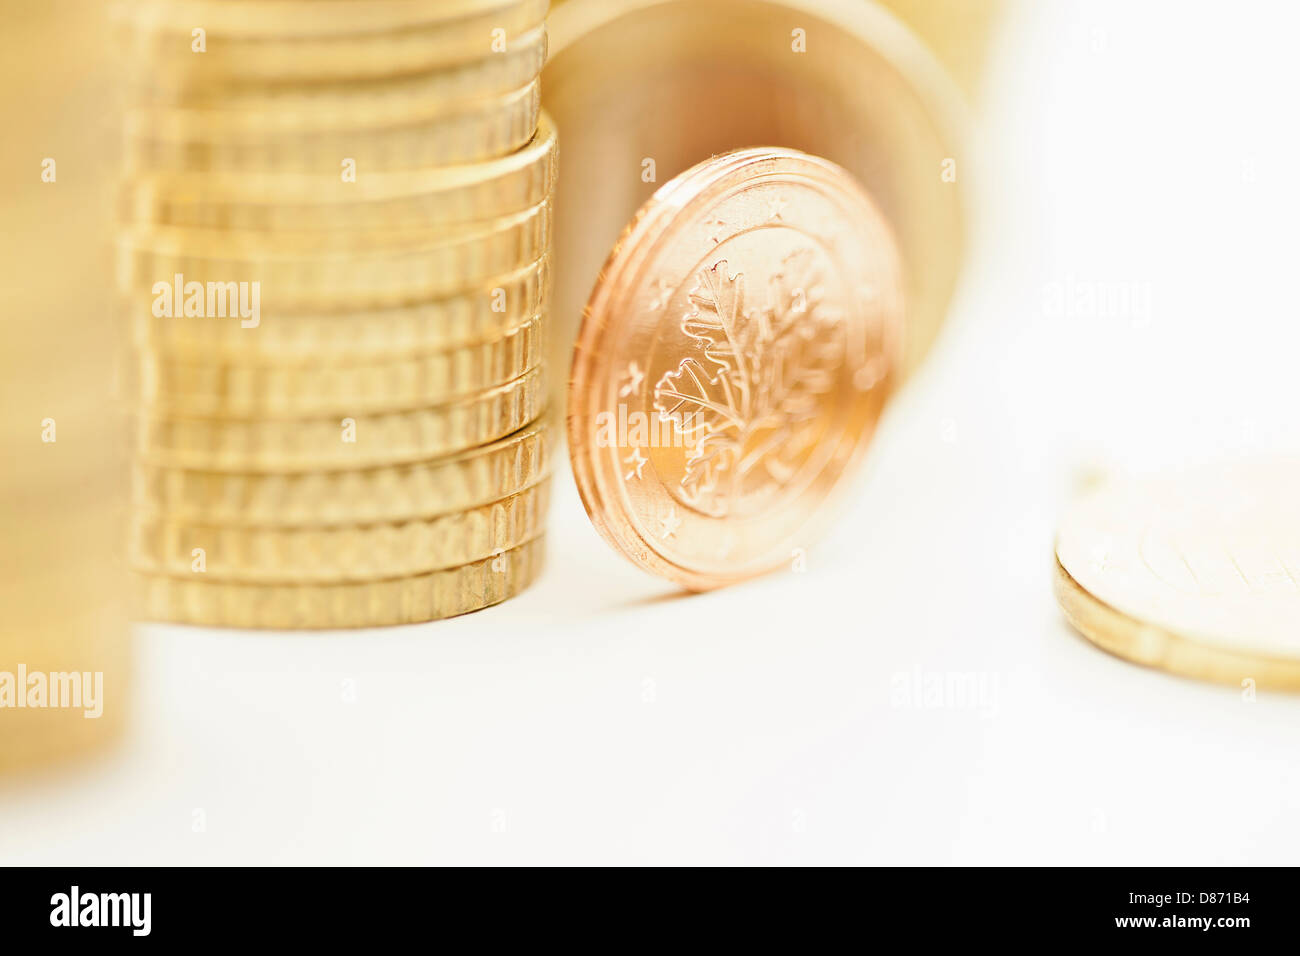 Stacks of Euro cent coins, close up Stock Photo